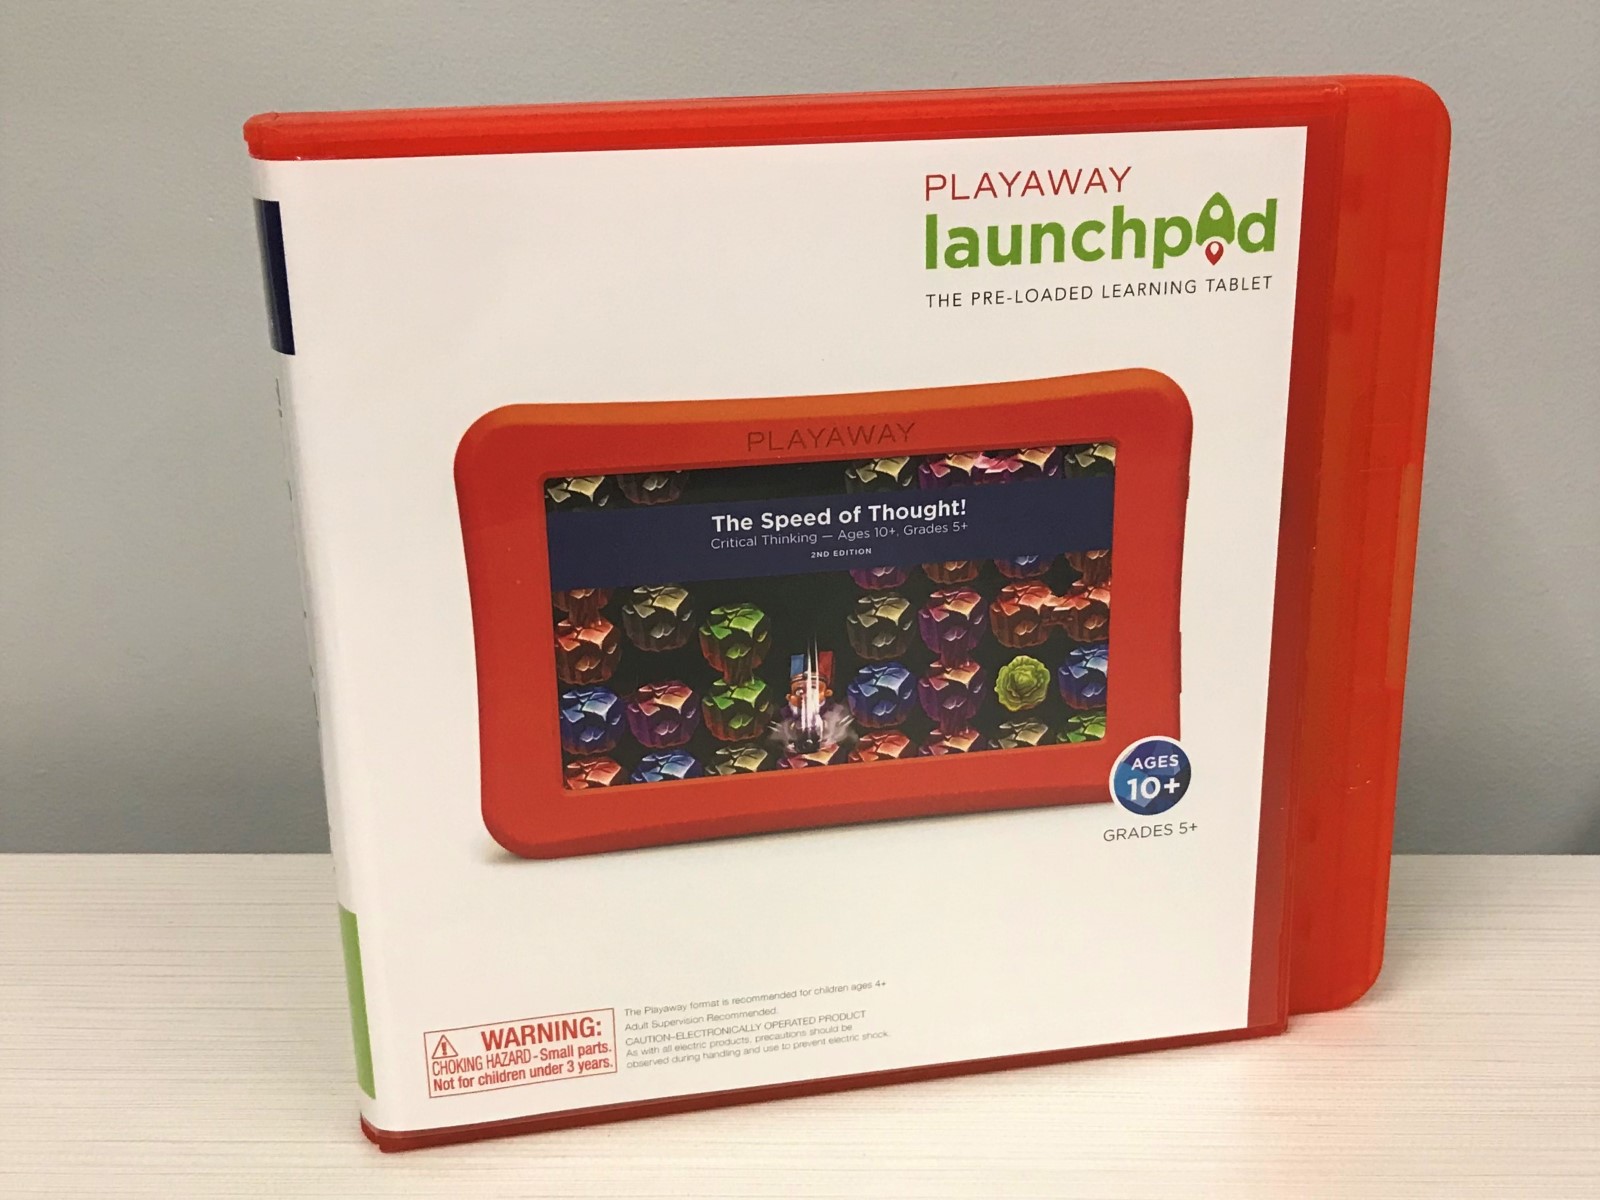 Case for Launchpad: The Speed of Thought!